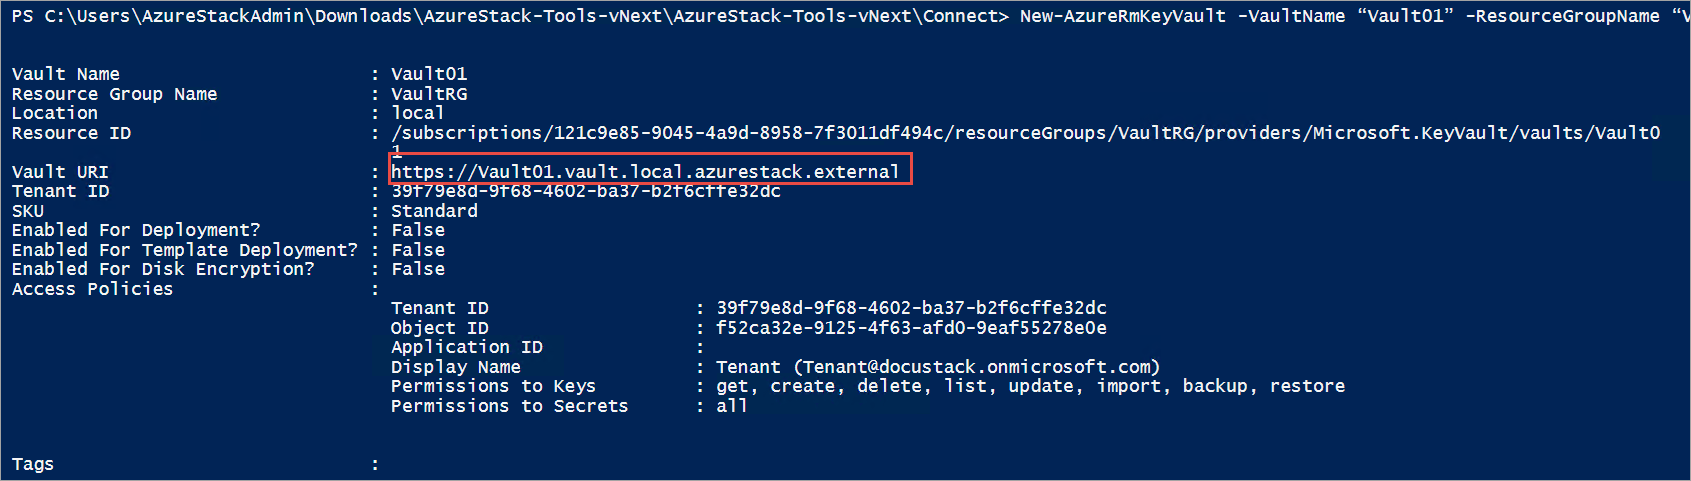 New key vault generated in Powershell